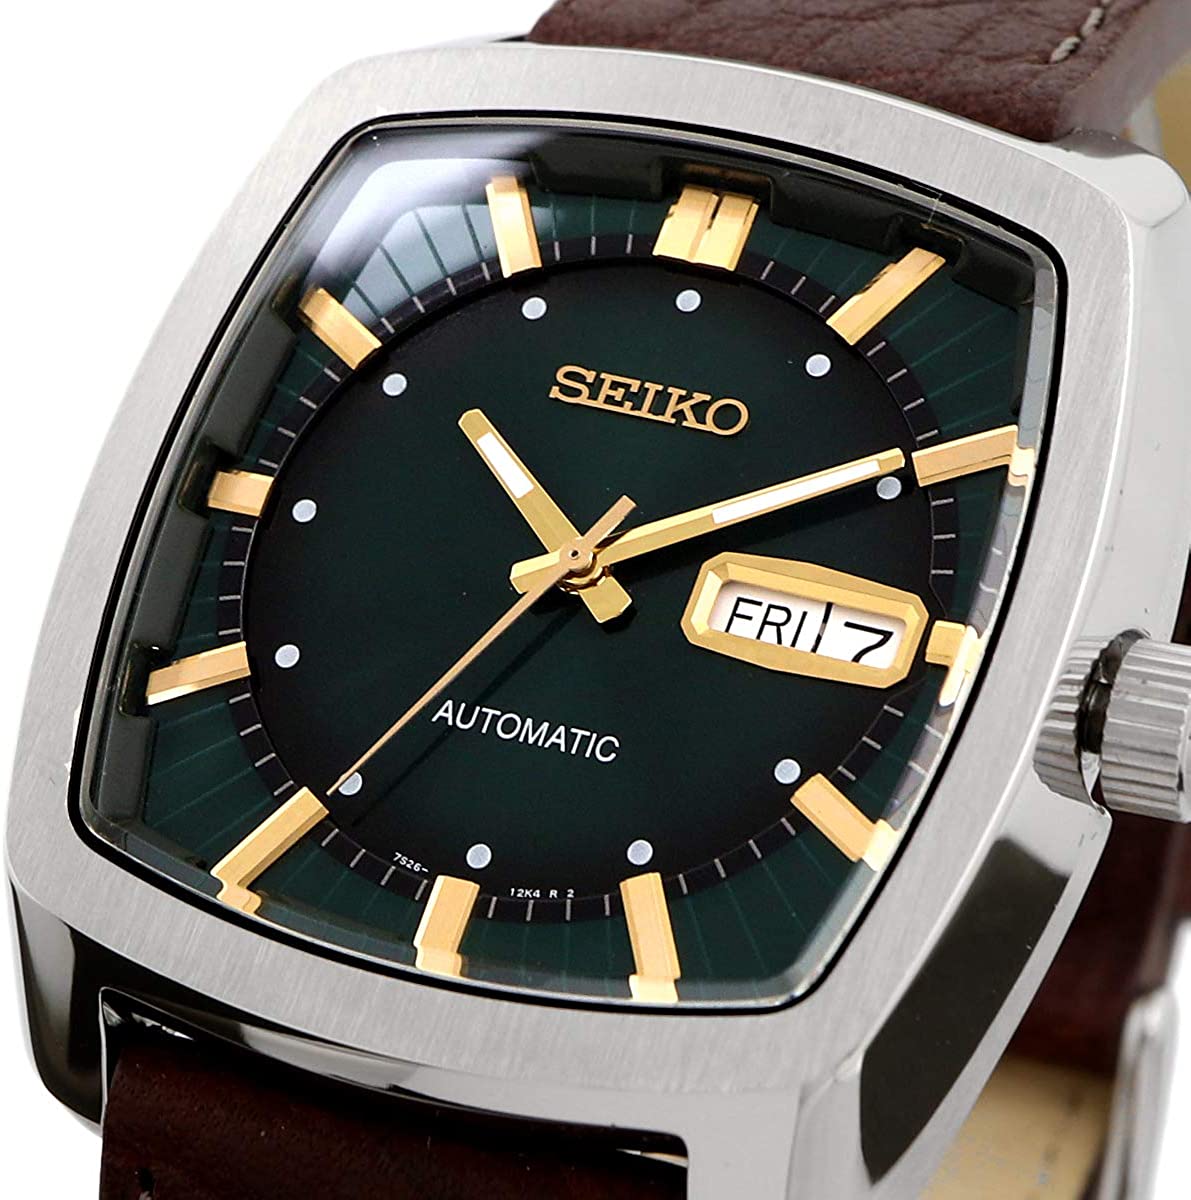 SEIKO Recraft Series Automatic winding SNKP27 - Discovery Japan Mall